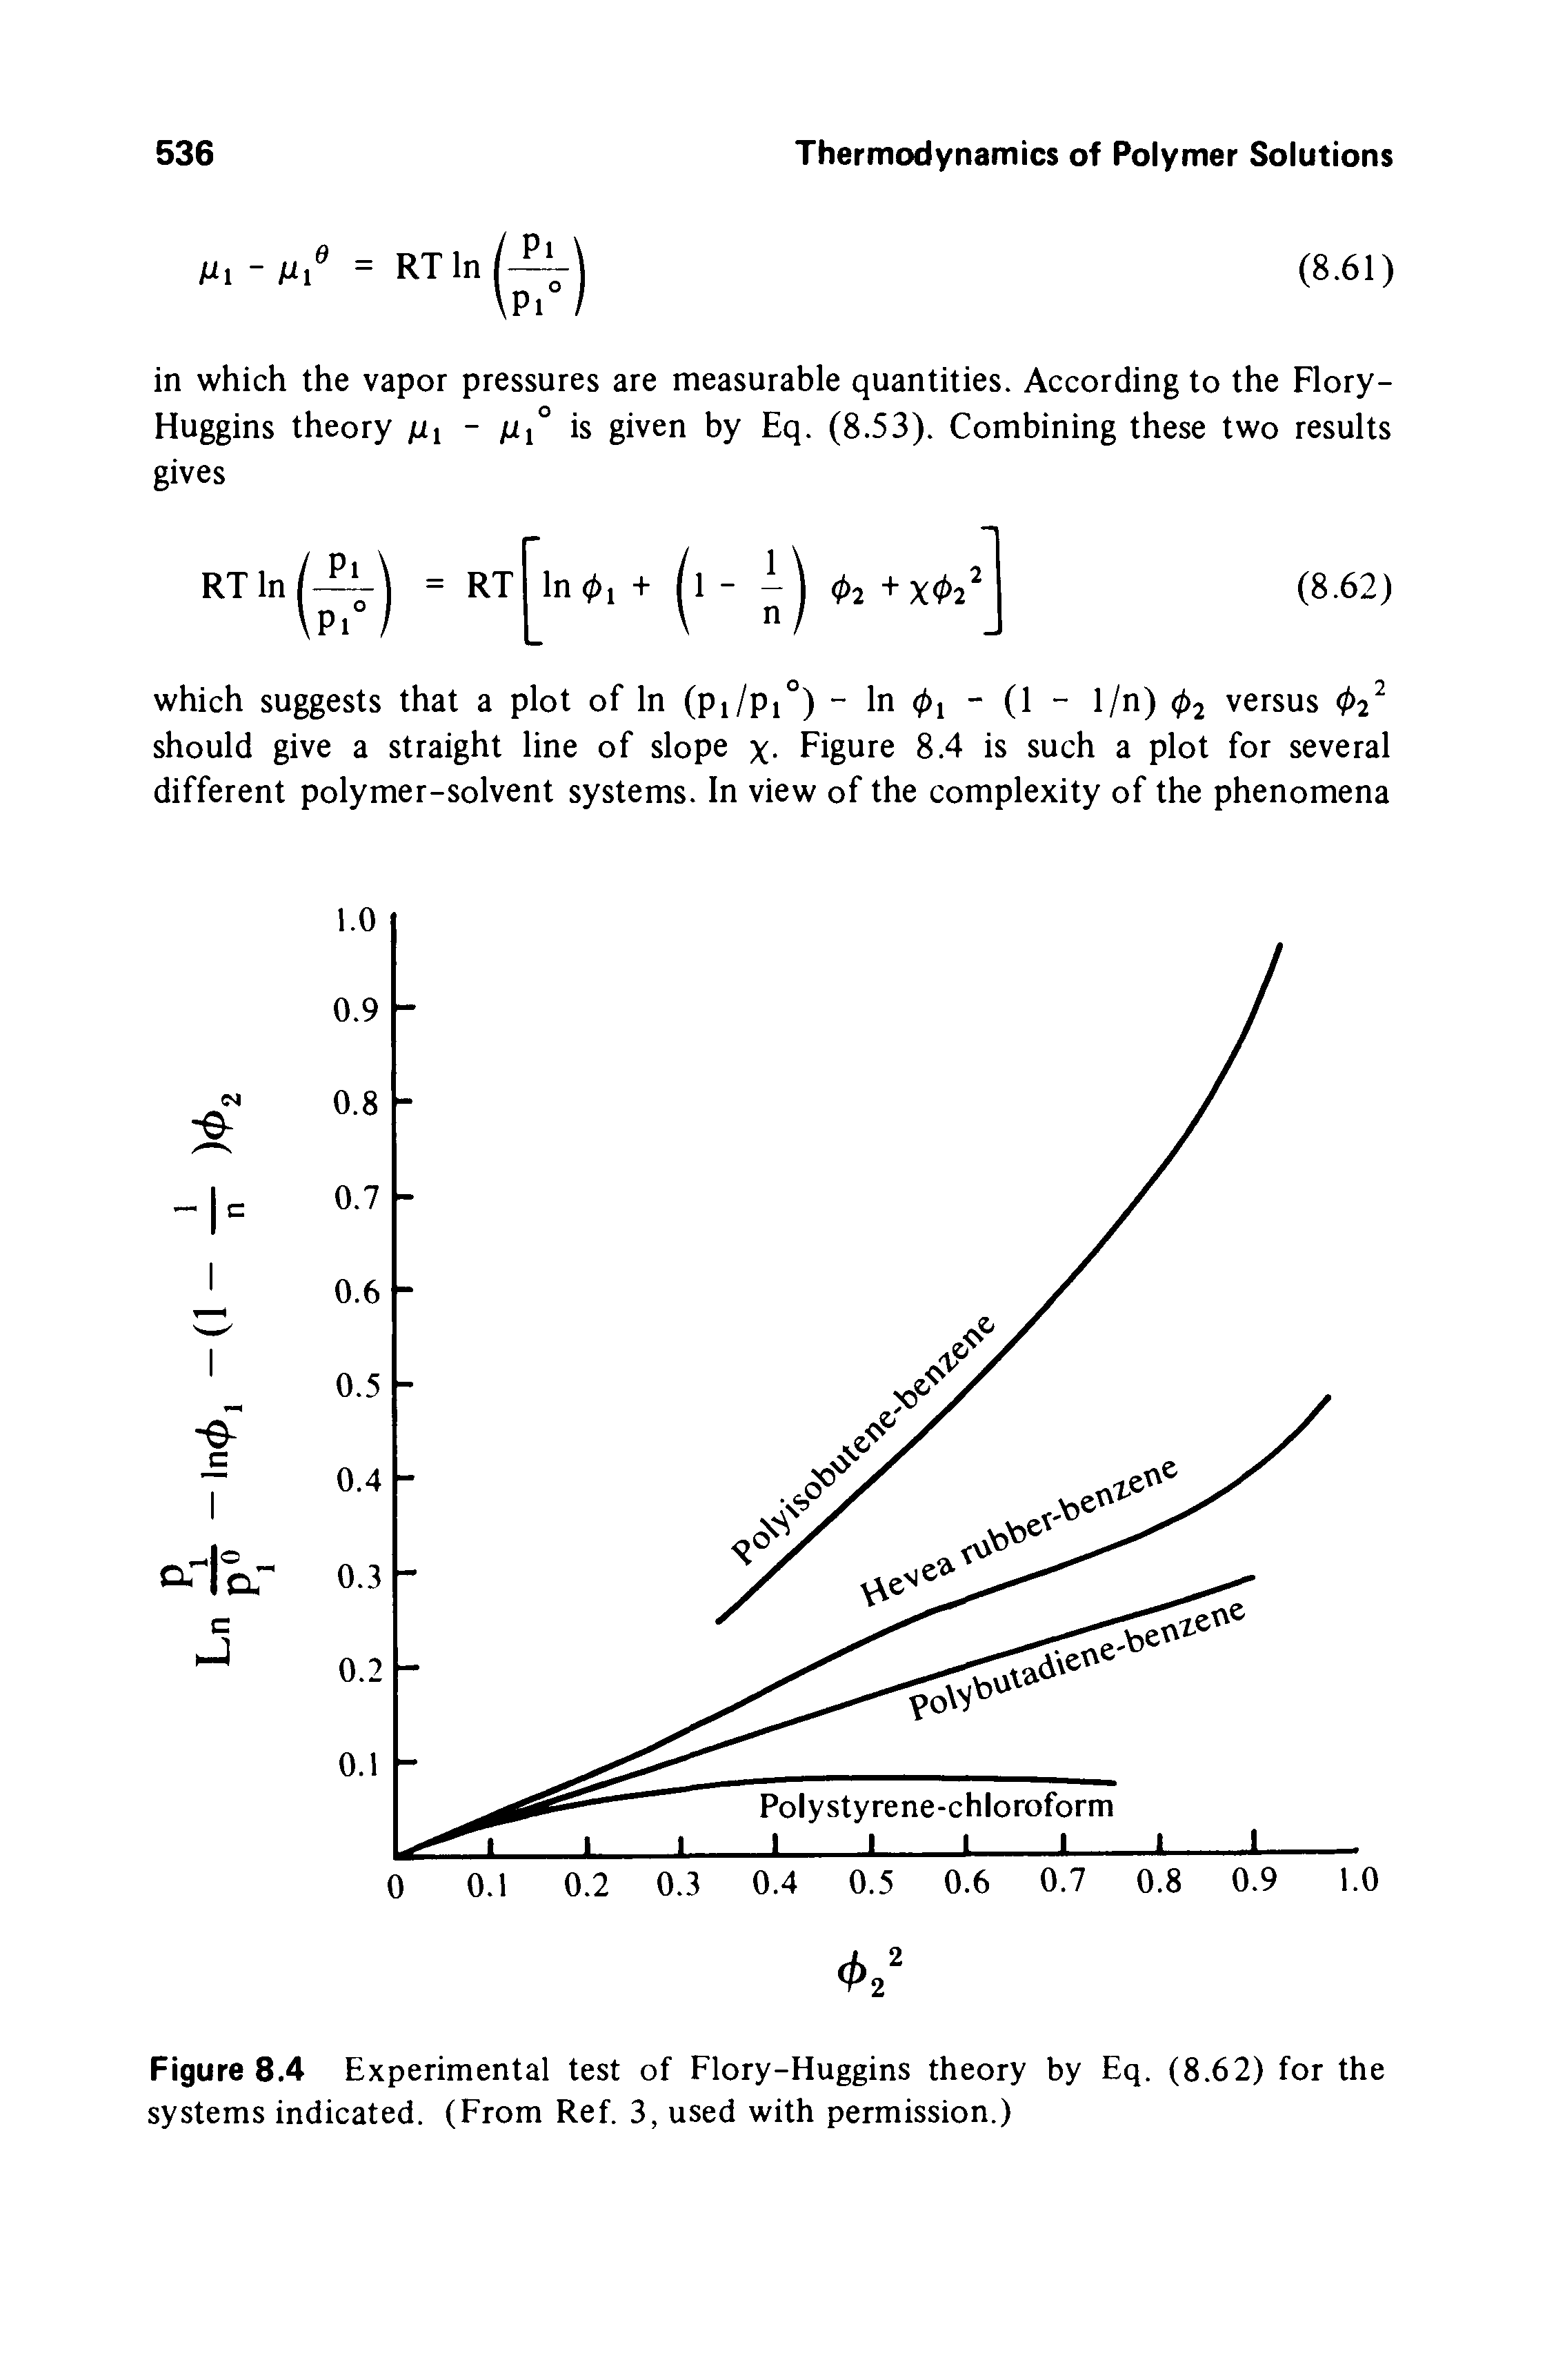 Figure 8.4 Experimental test of Flory-Huggins theory by Eq. (8.62) for the systems indicated. (From Ref. 3, used with permission.)...